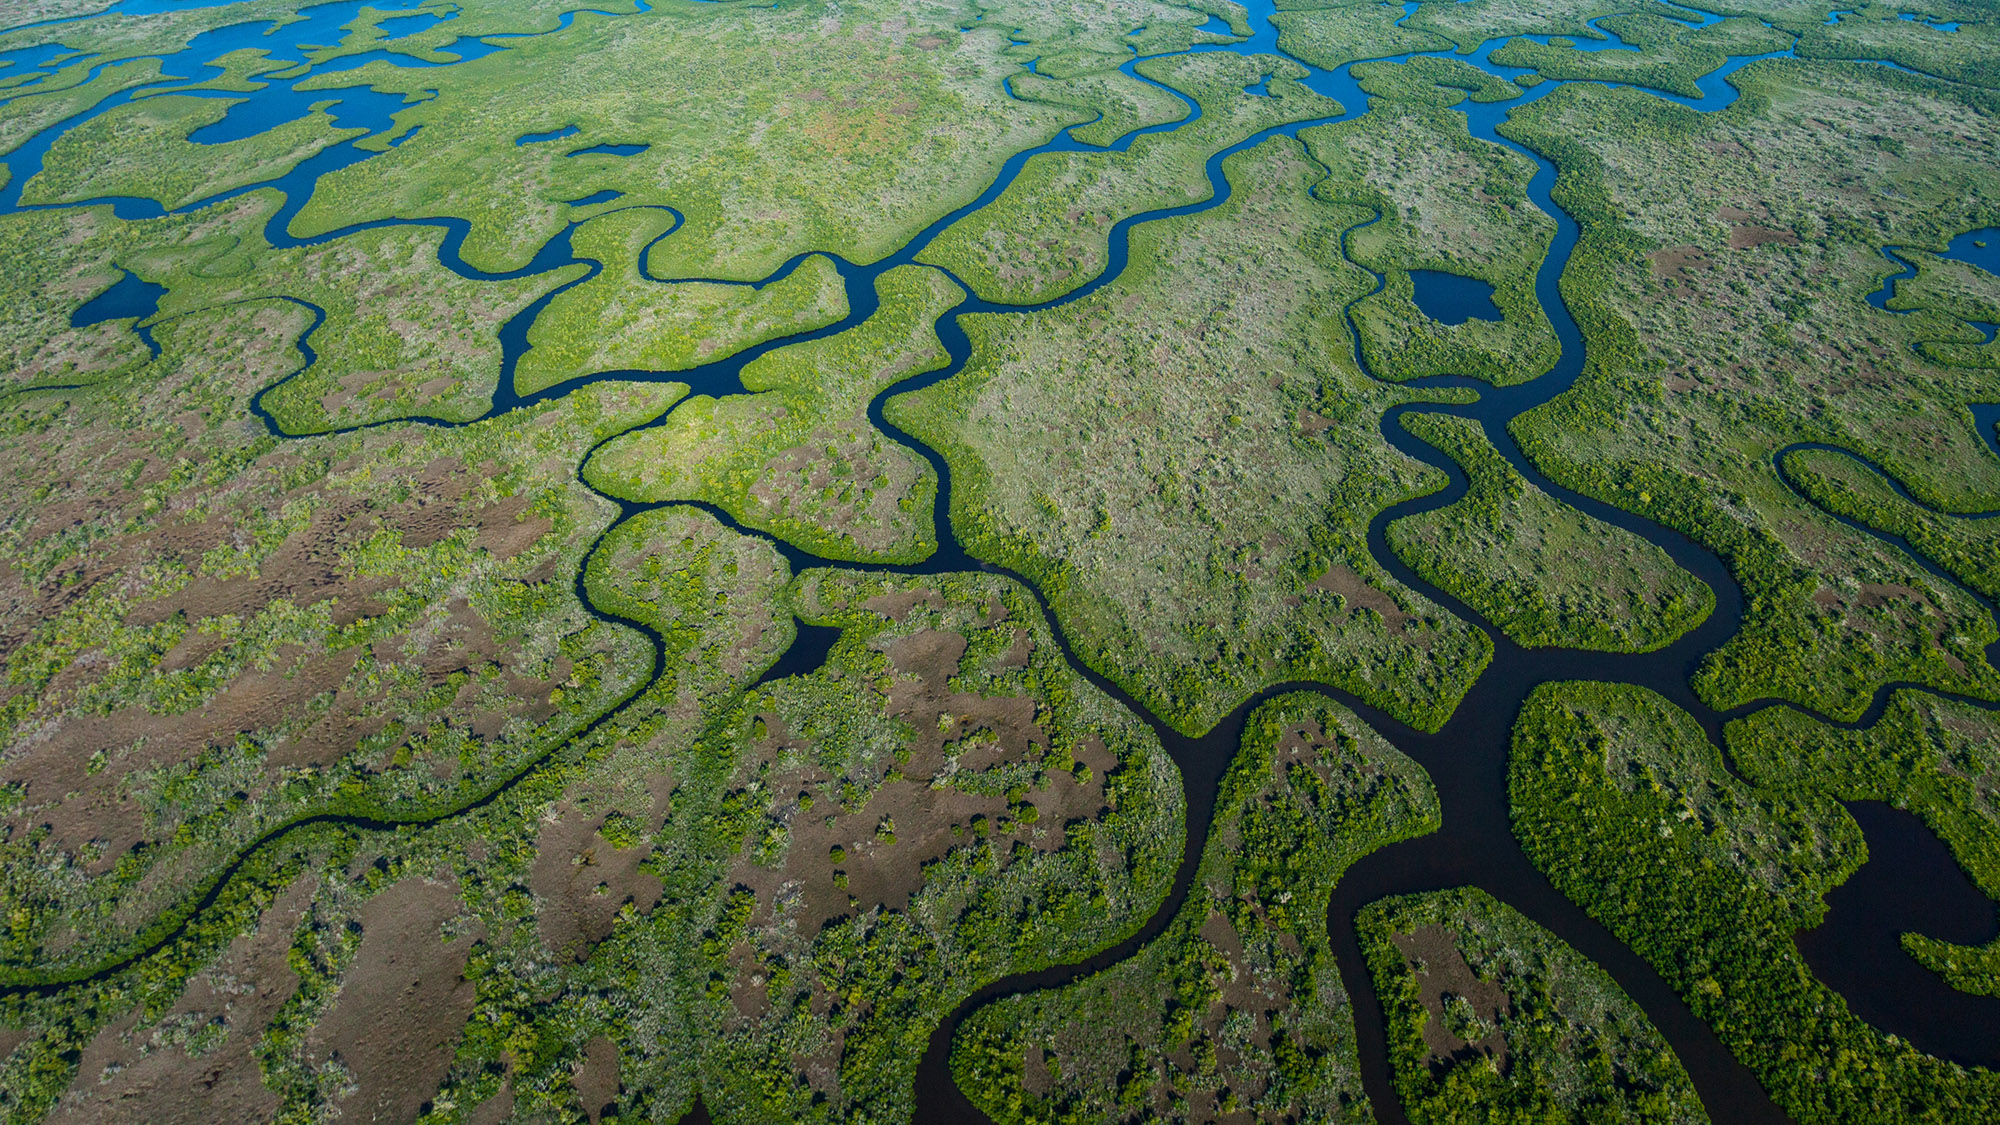 The Everglades backcountry.